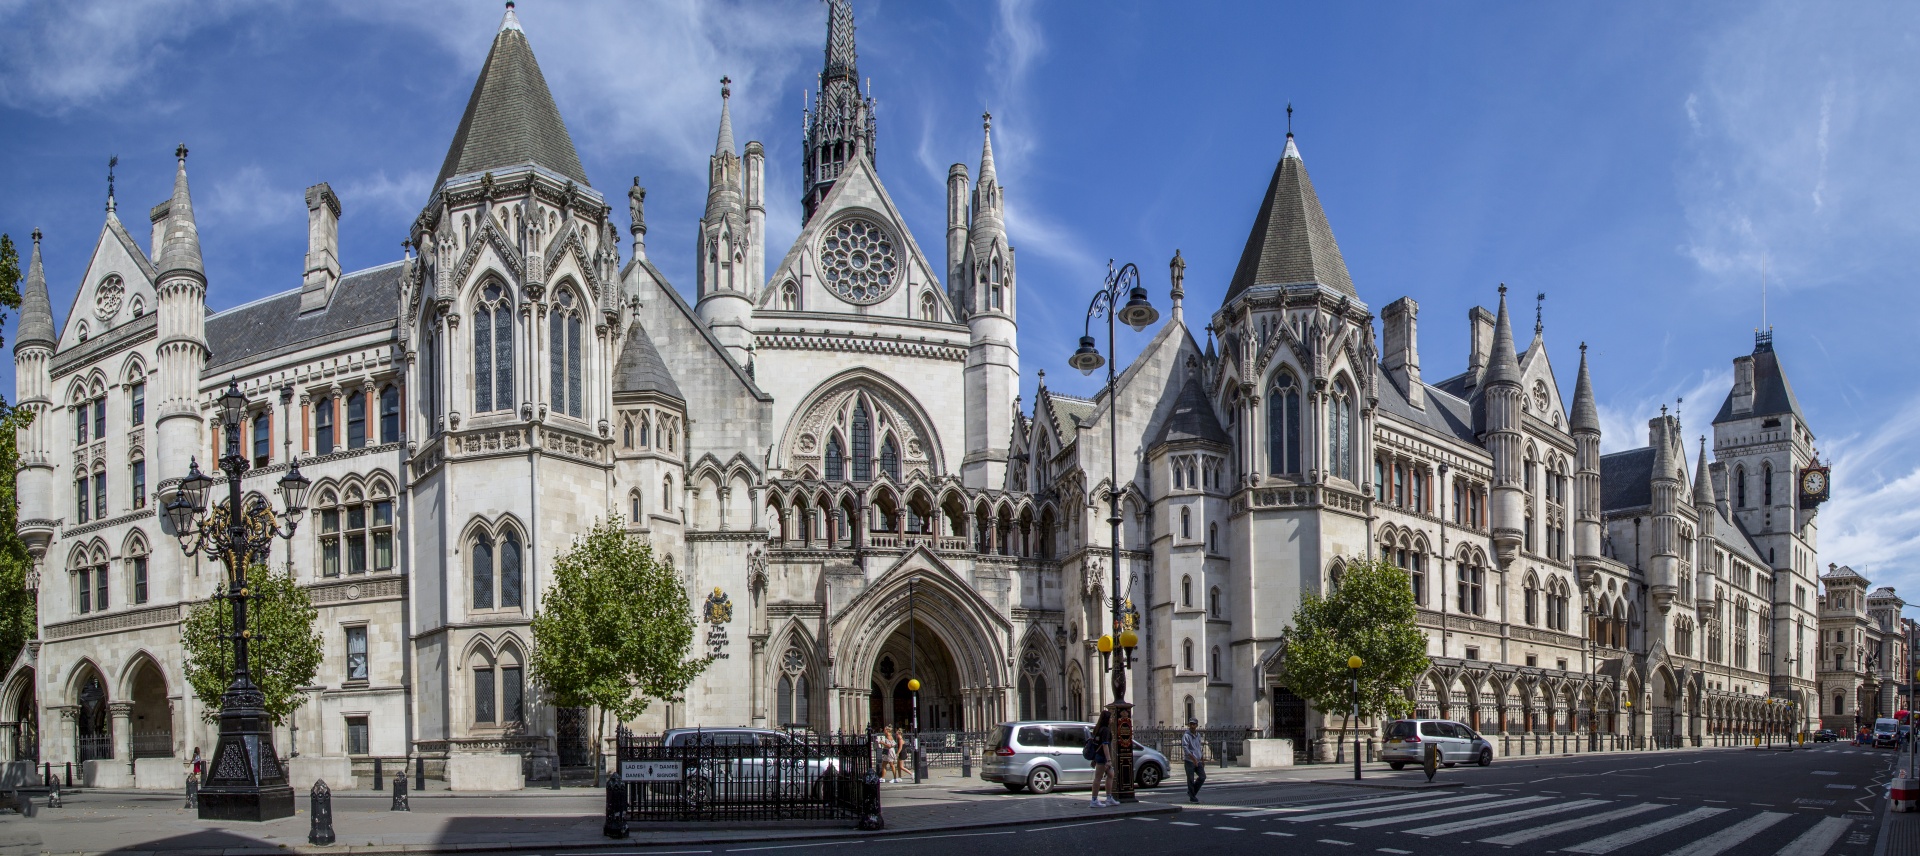 The Royal Courts of Justice, commonly called the Law Courts, is a court building in London which houses the High Court and Court of Appeal of England and Wales. The High Court also sits on circuit and in other major cities